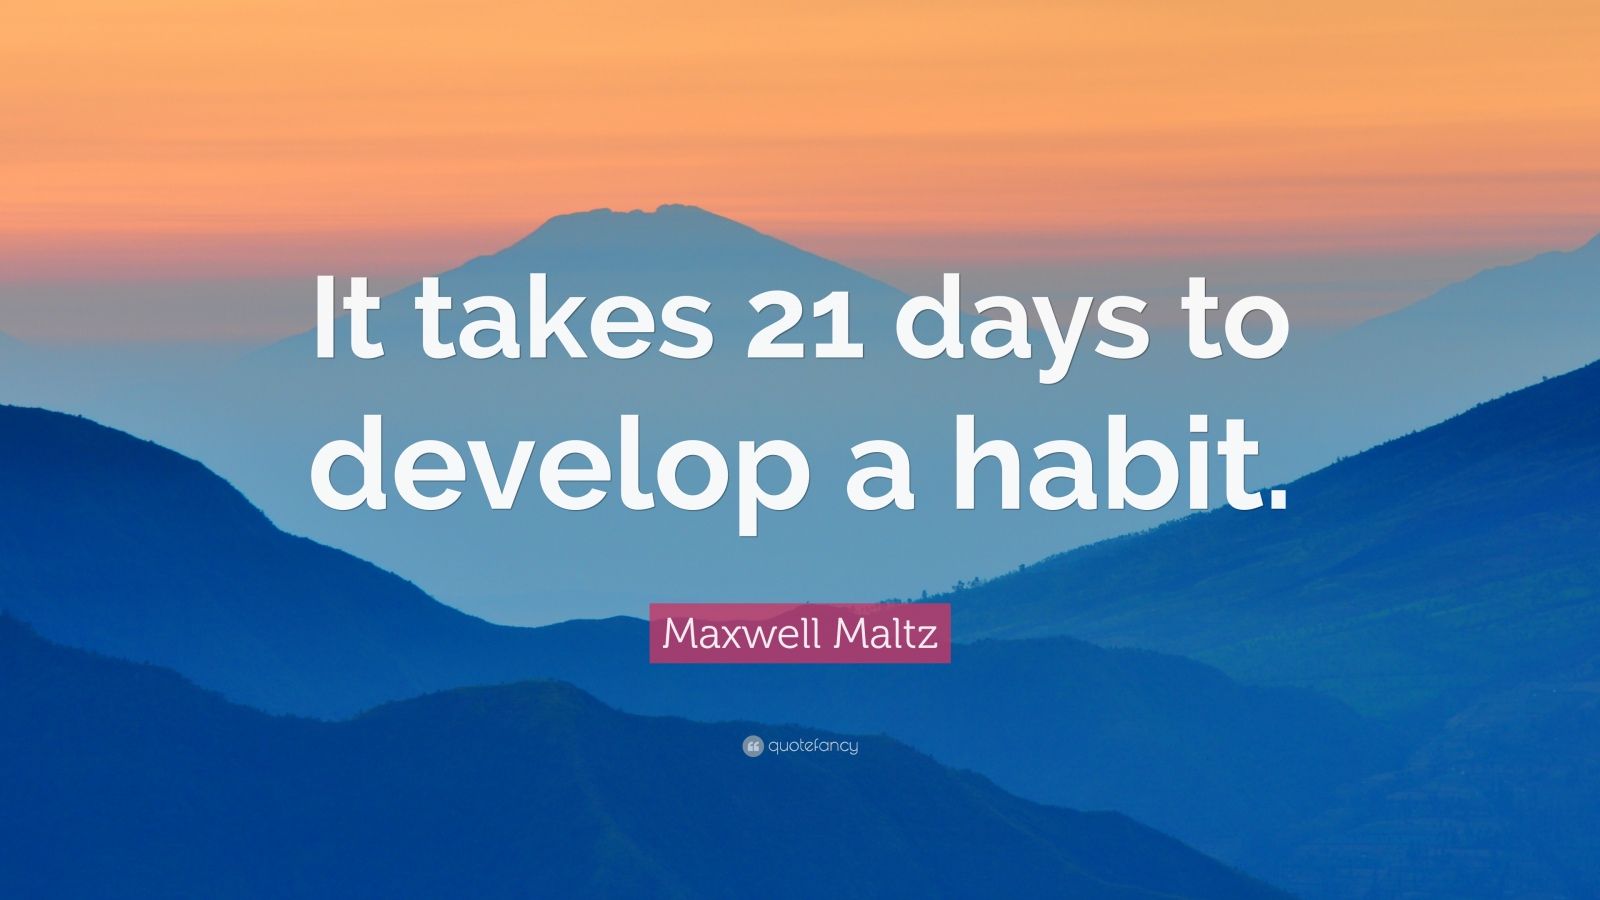 Maxwell Maltz Quote: “It takes 21 days to develop a habit.”